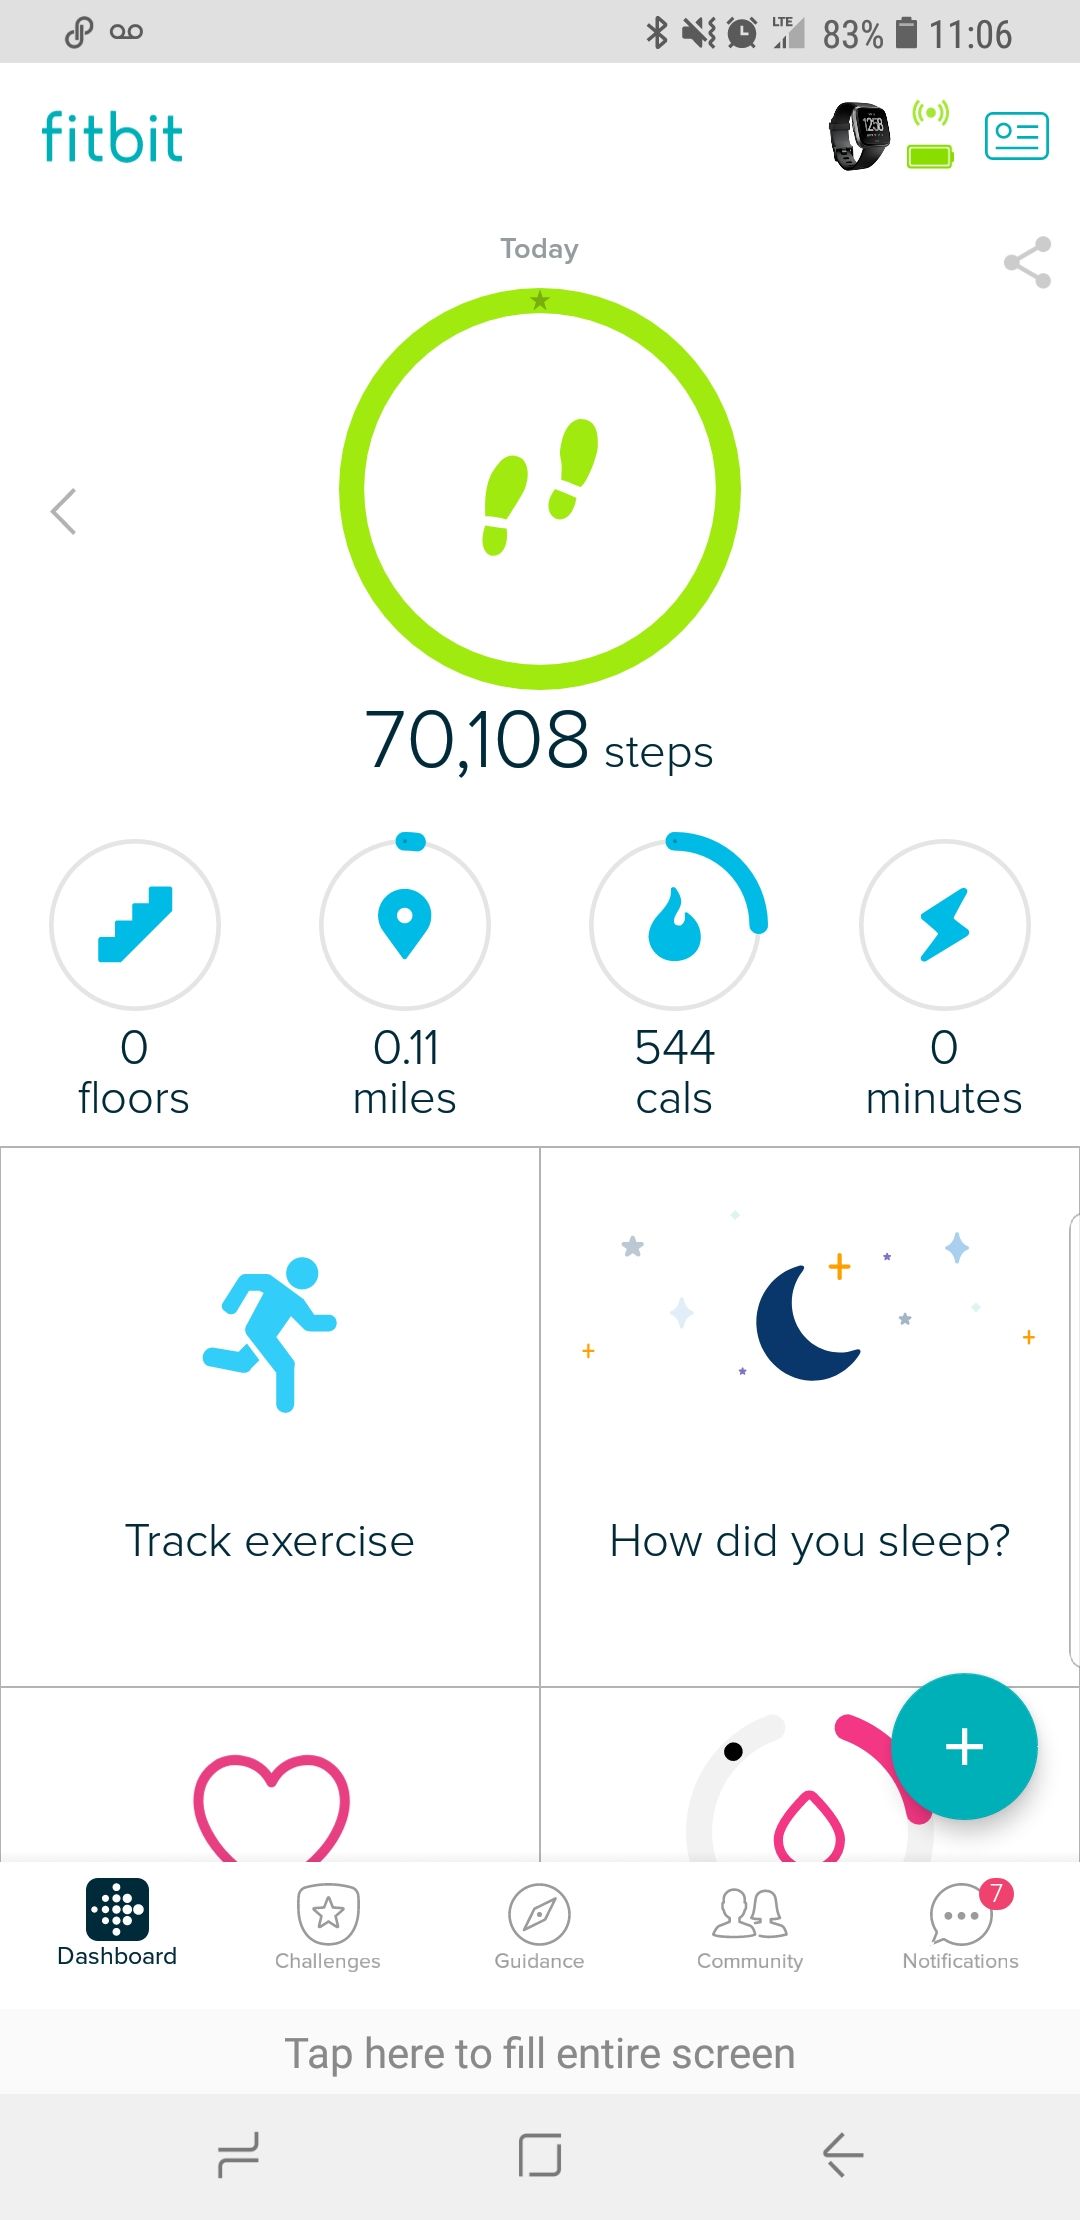 fitbit counting extra steps